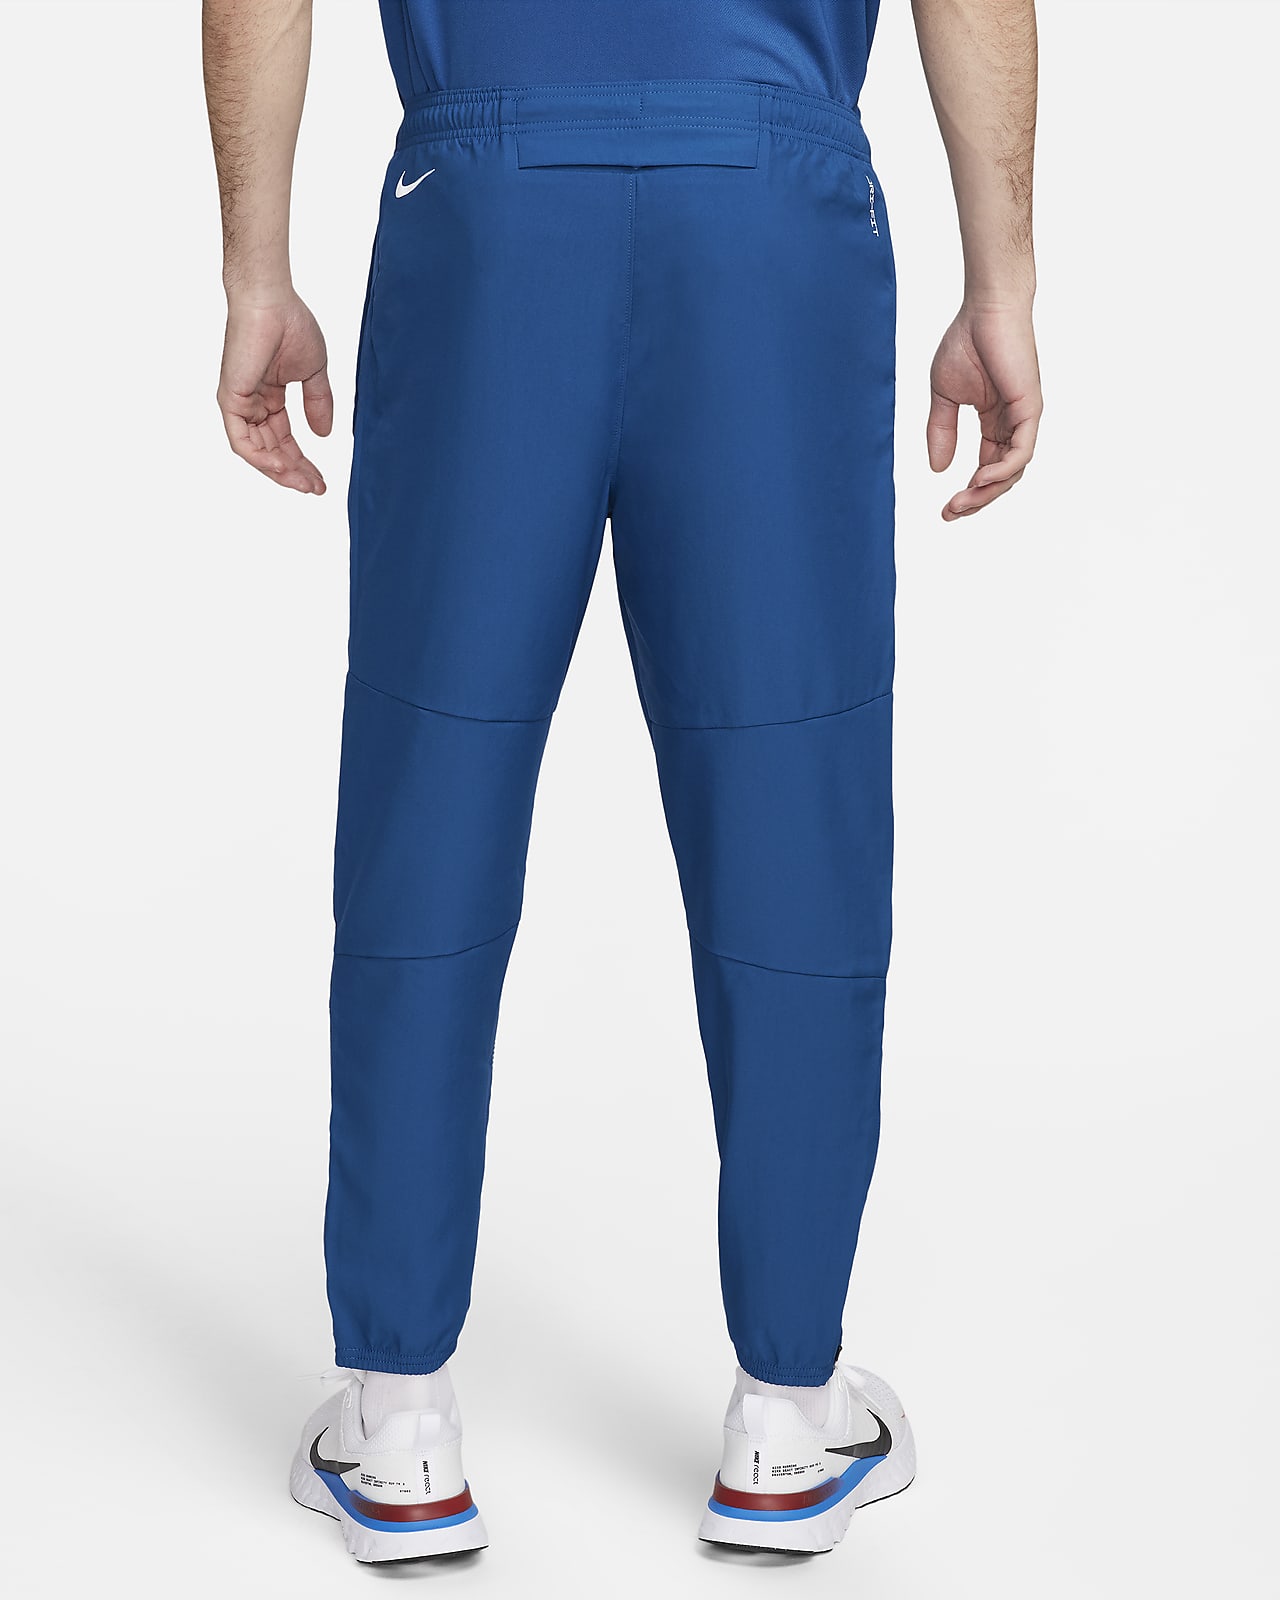 Nike Challenger Men's Dri-FIT Running Tights. Nike IE